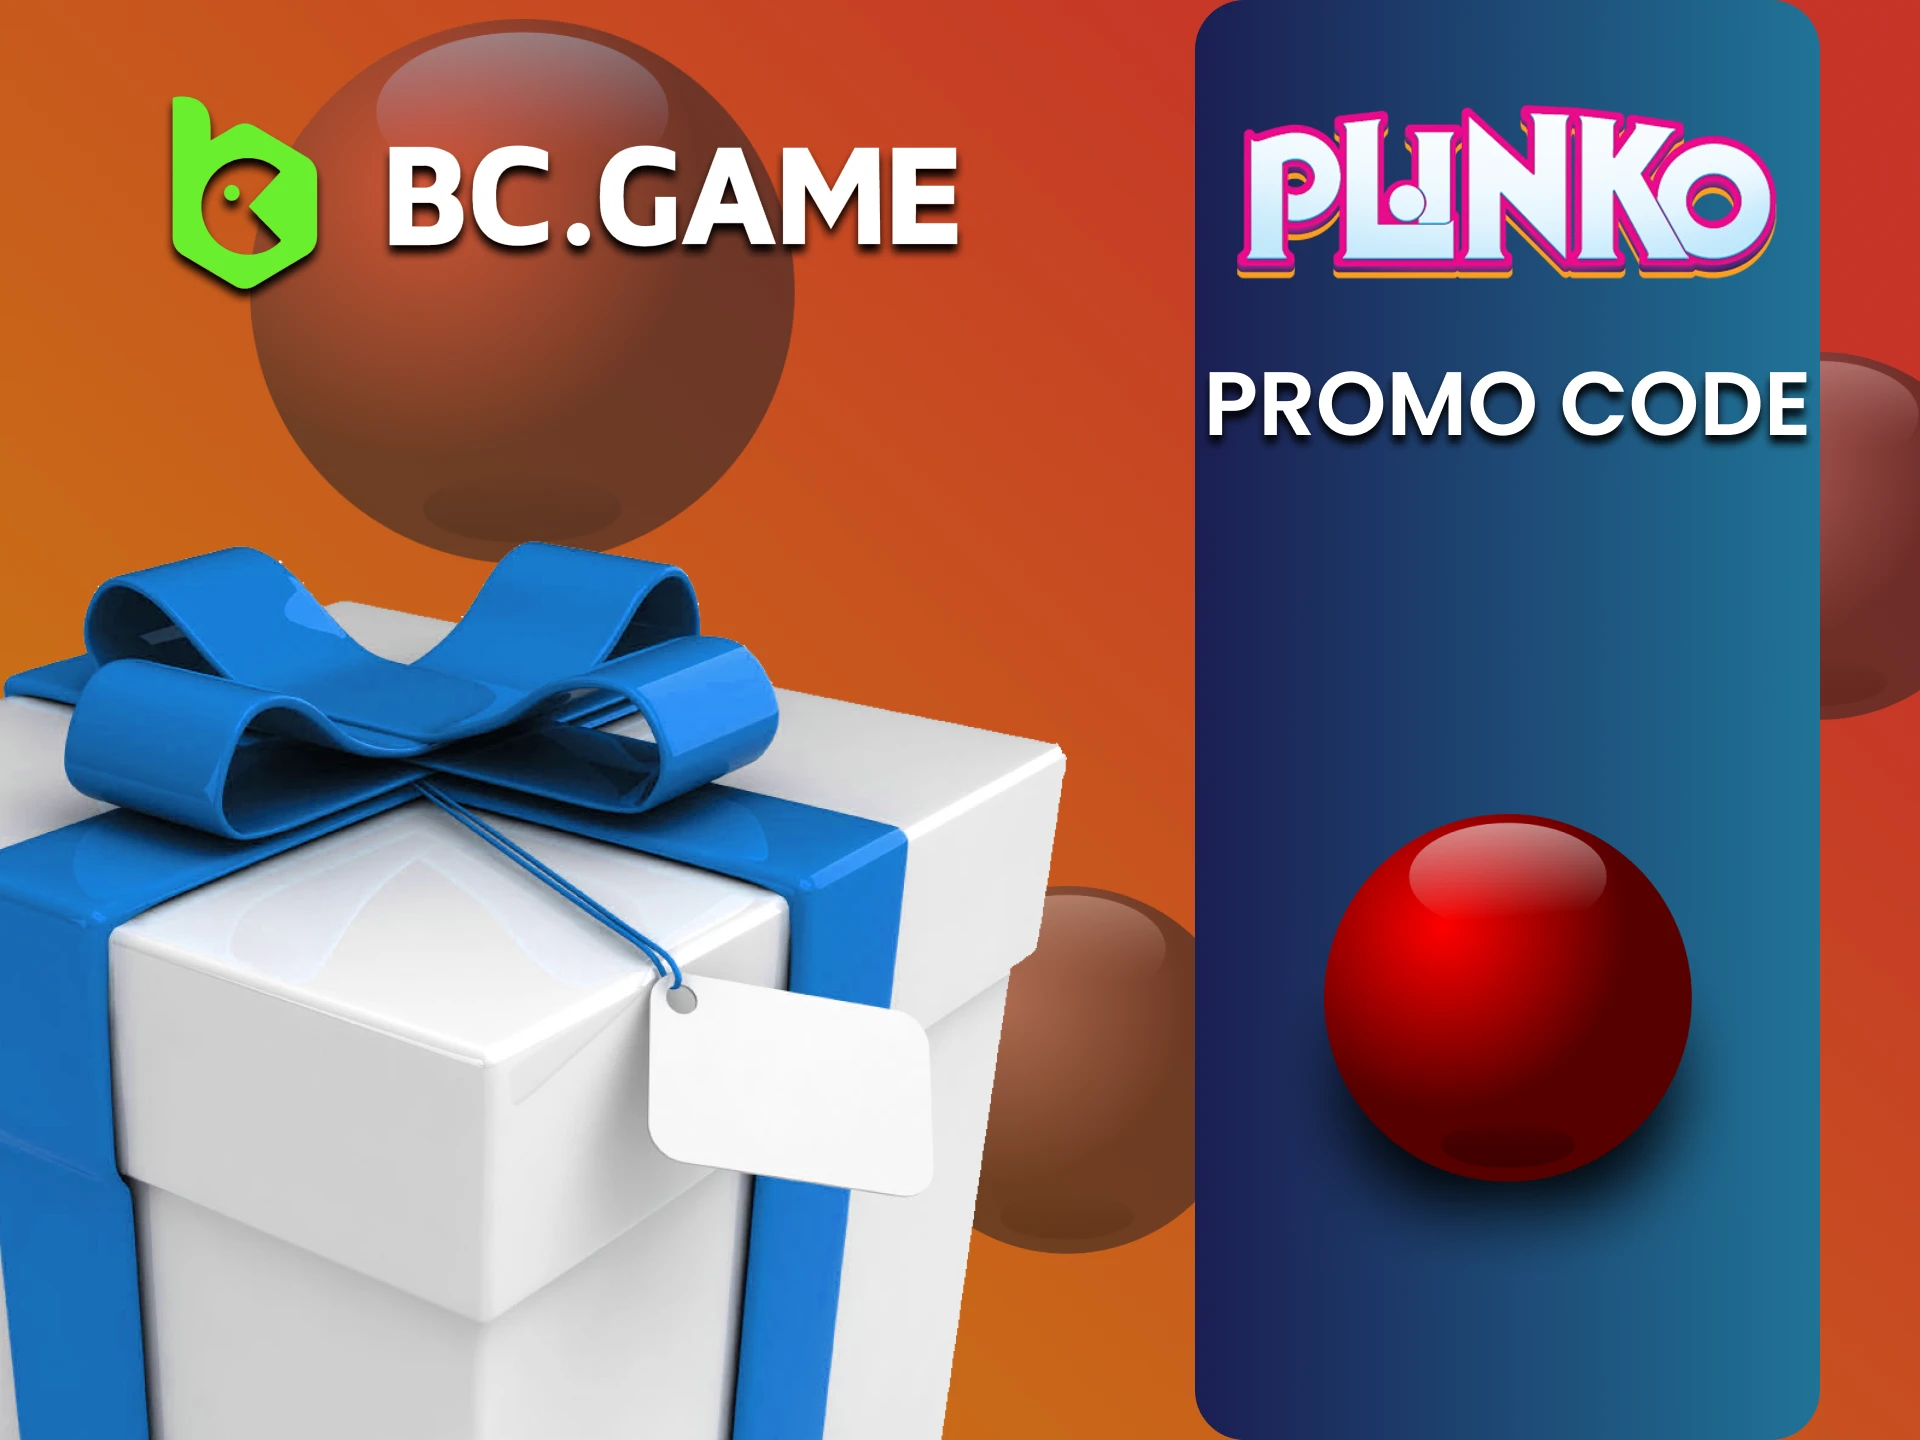 Get a bonus from BCGame by entering a promo code for the game Plinko.